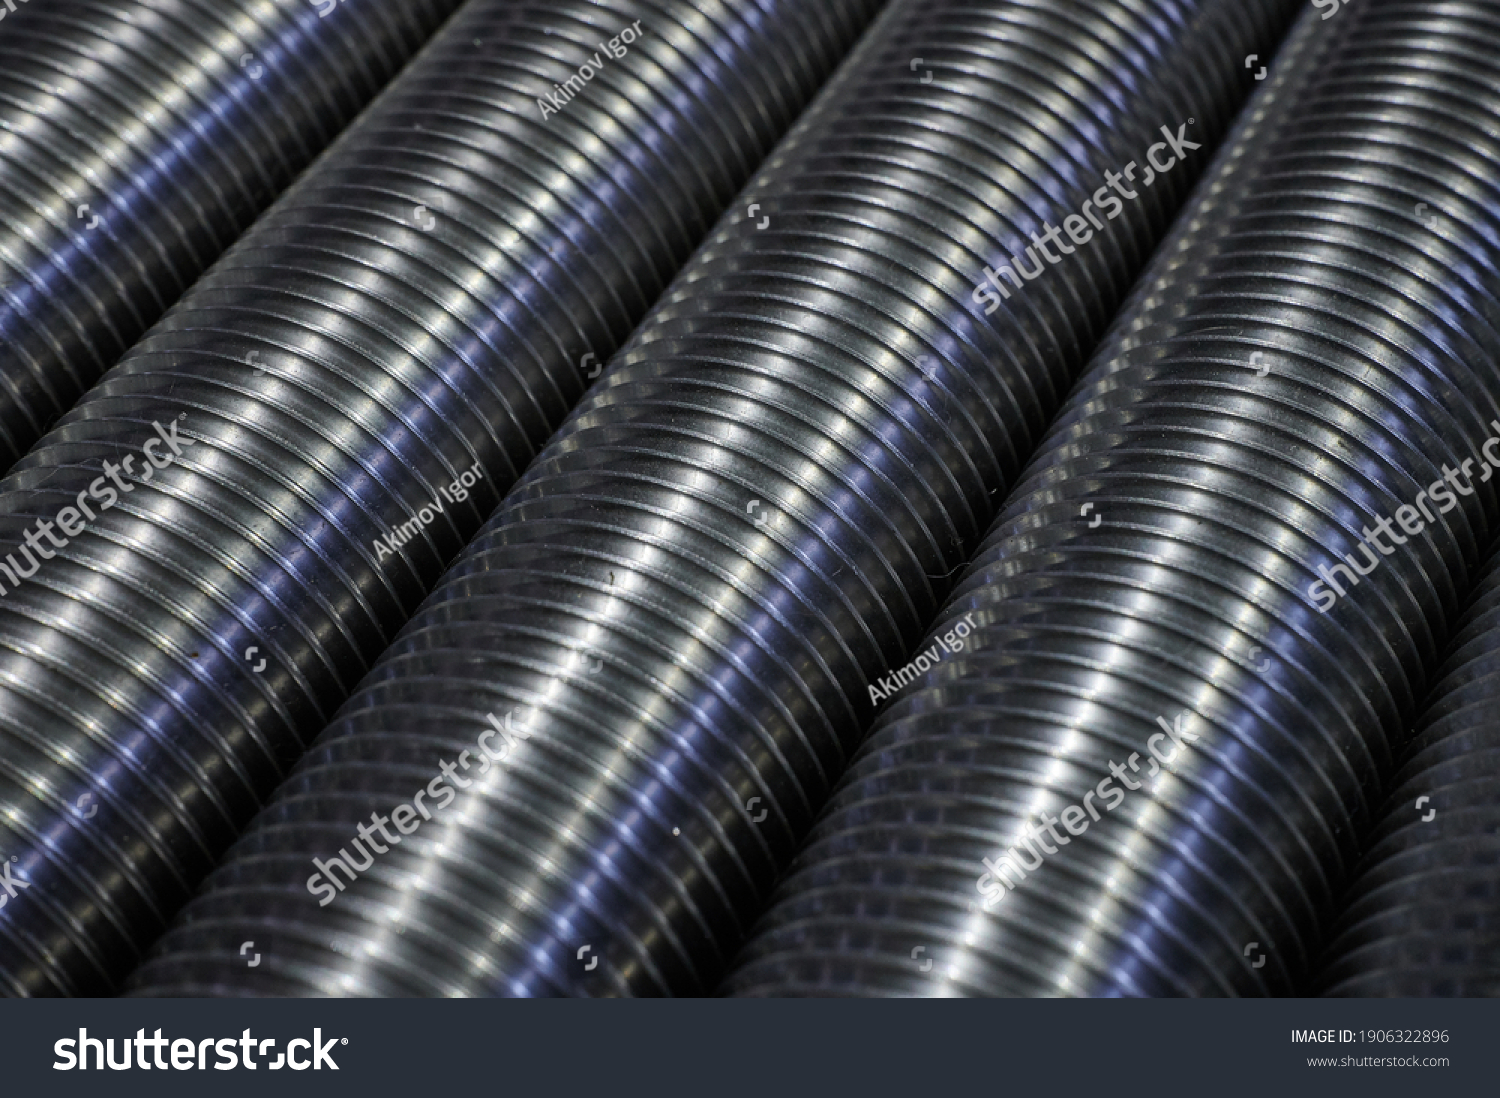 Large-diameter industrial steel bolts without heads, used in the assembly of structures in mechanical engineering, in the warehouse of finished products in large quantities #1906322896